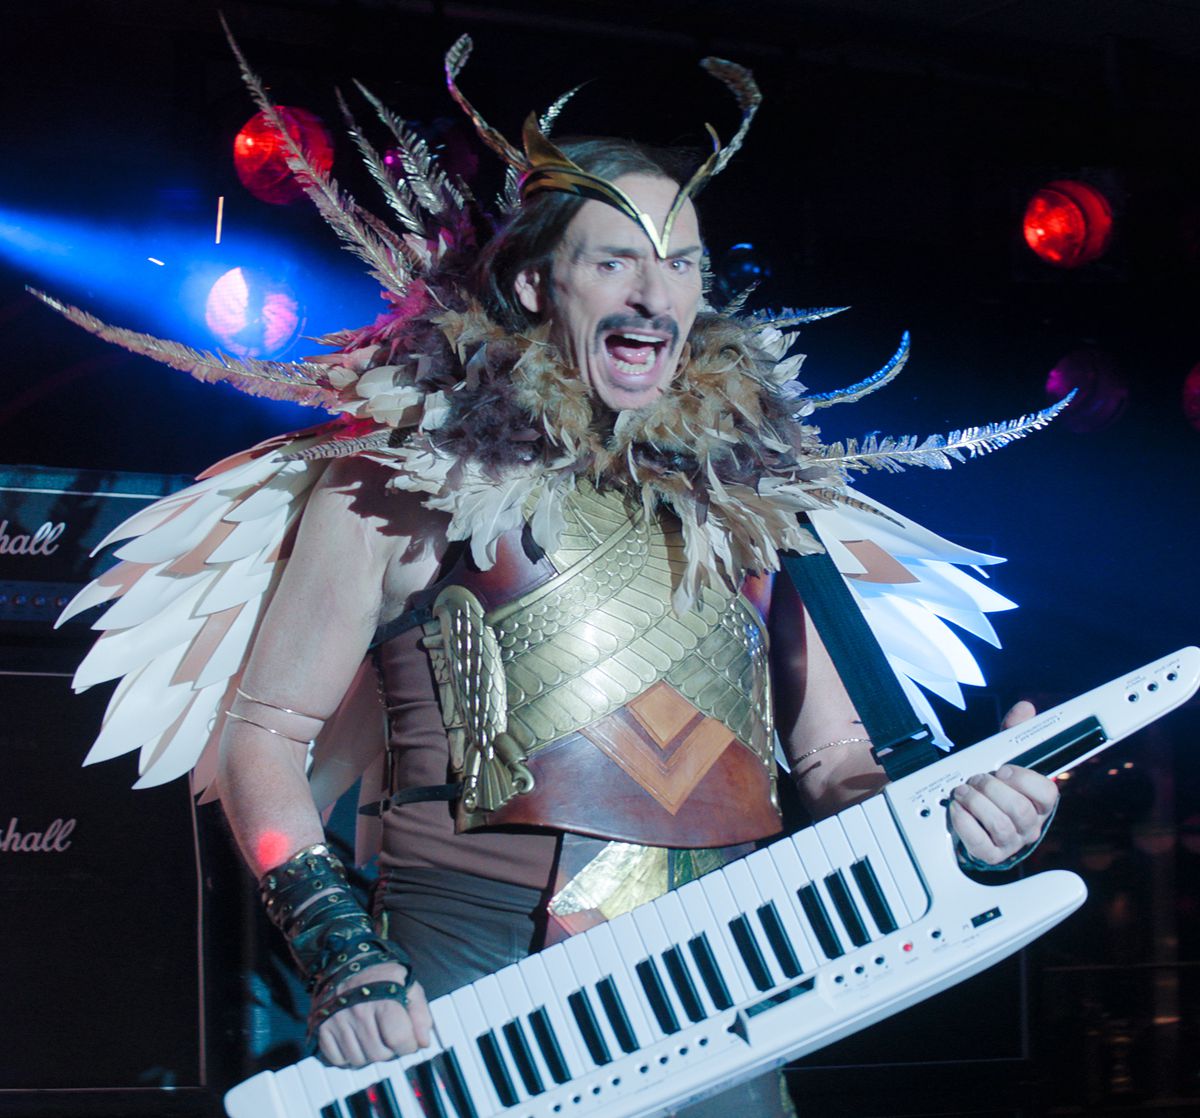 Julian Barrett playing a keytar while dressed as an owl in Knuckles